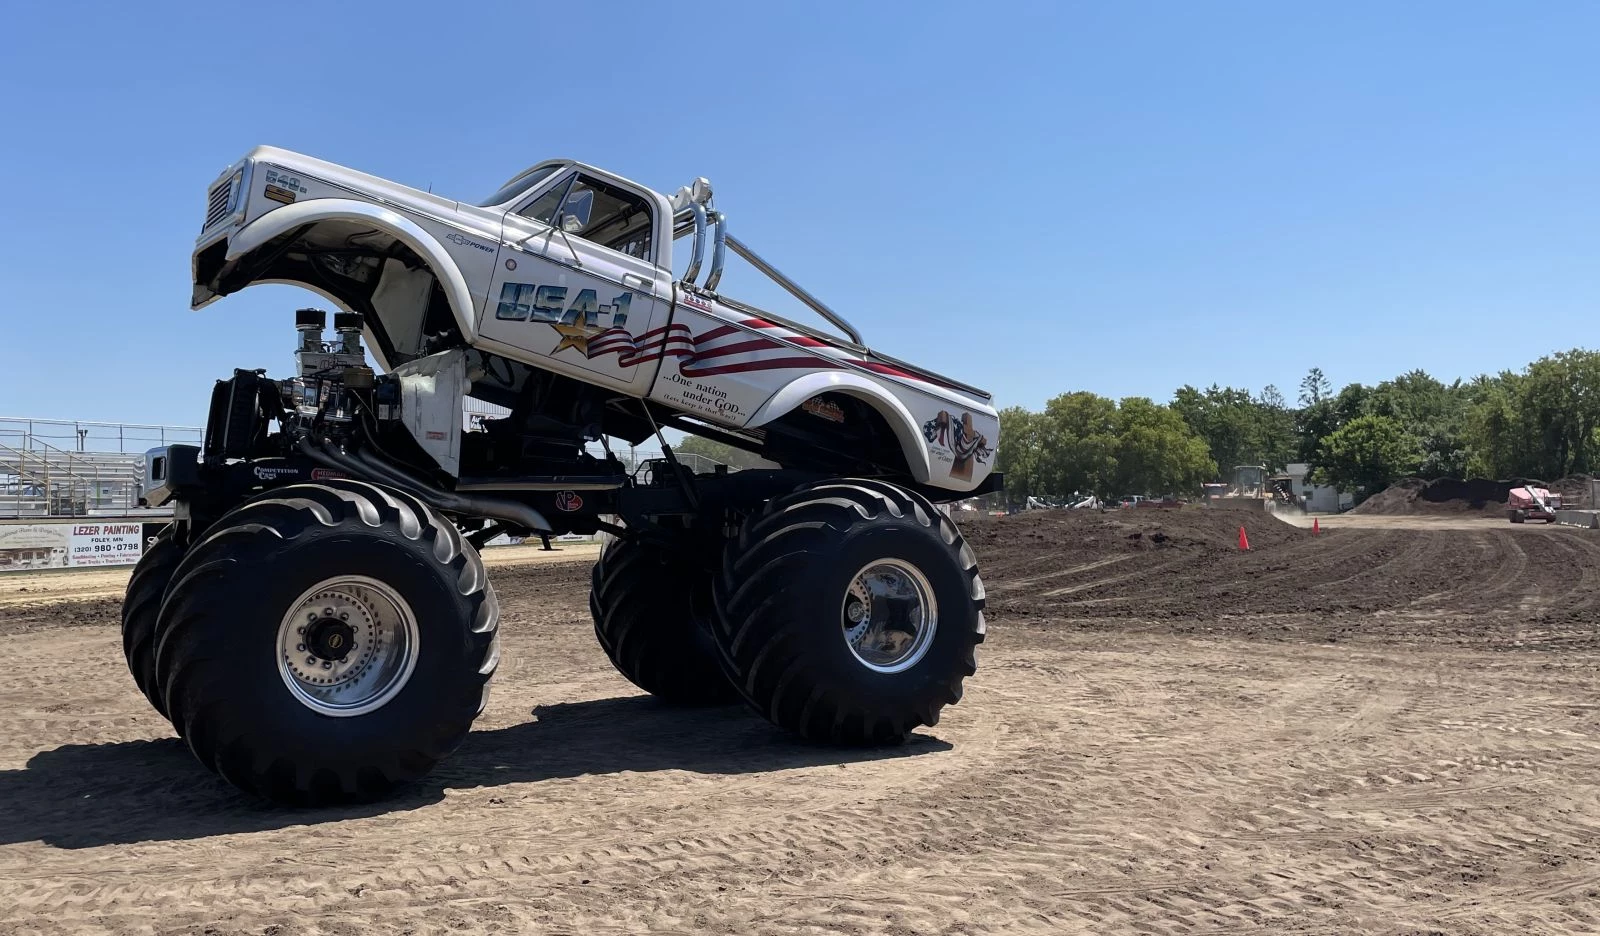 St. Cloud Home to Largest Collection of Monster Trucks in USA